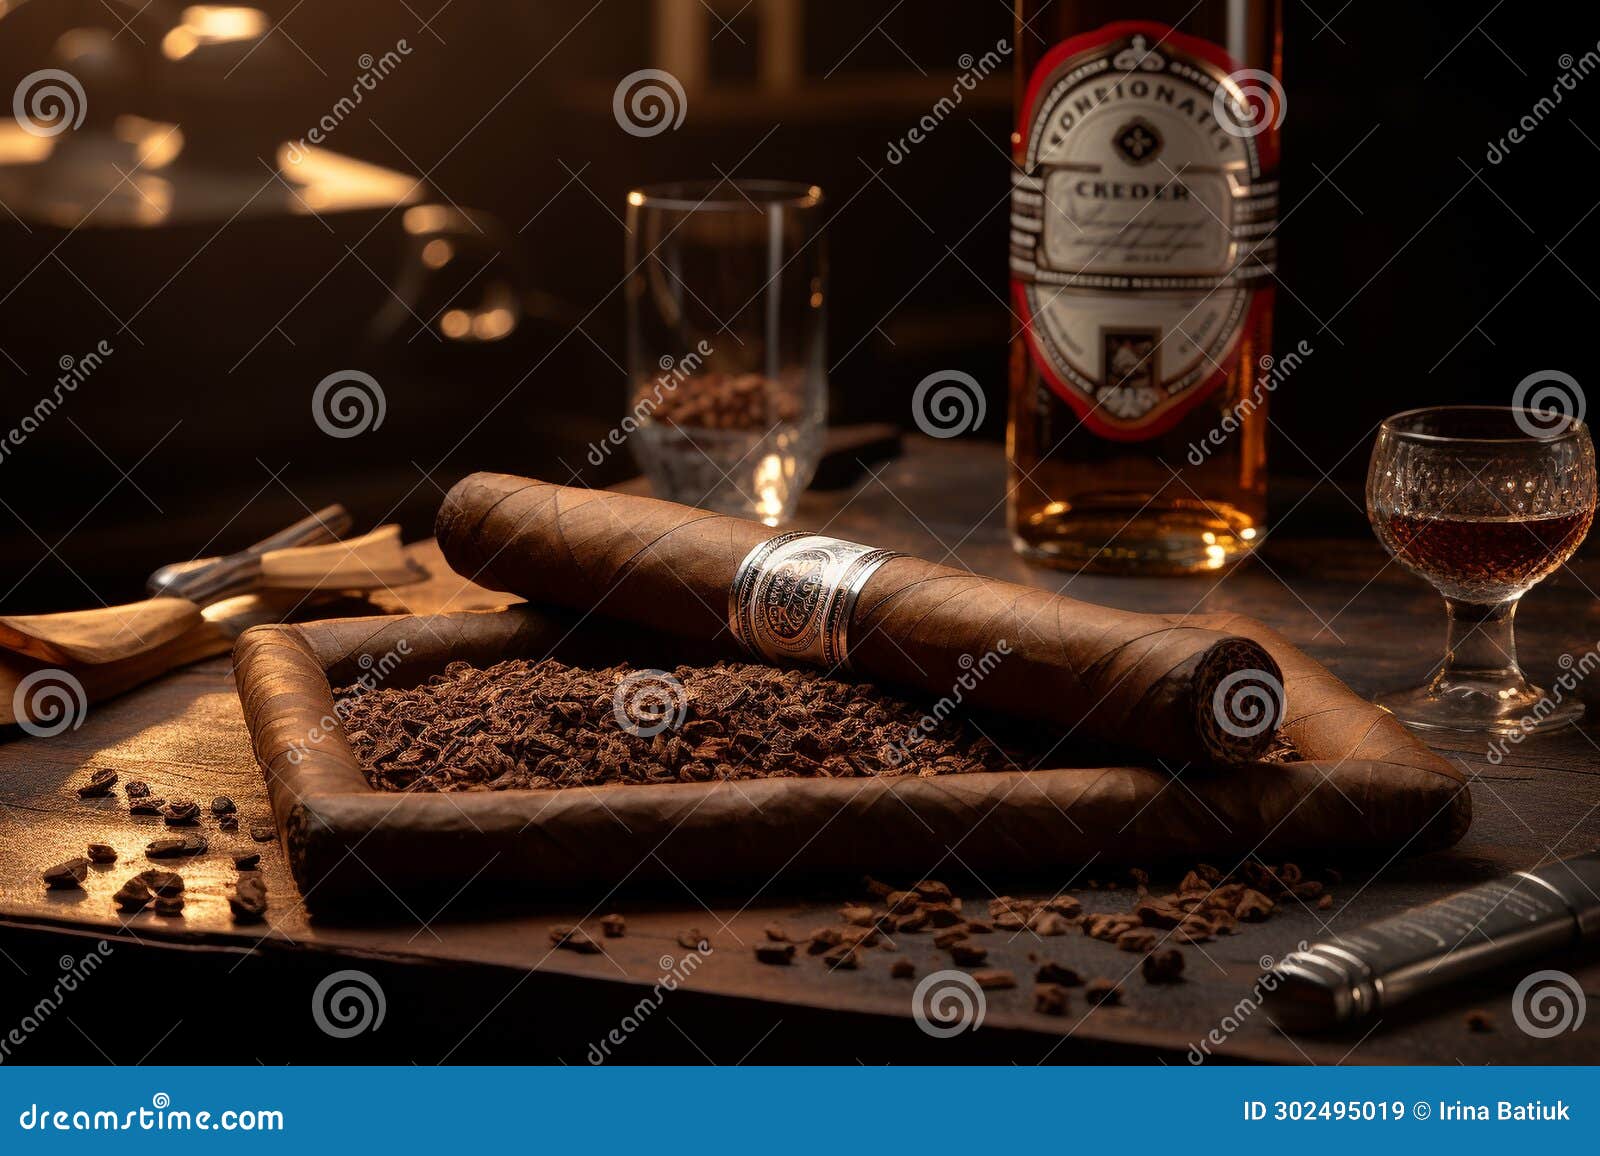 cigar, ciggy, smoke, stogie tobacco siga cigarette unhealthy toxic alcohol risk nicotine, chemicals and additives, major